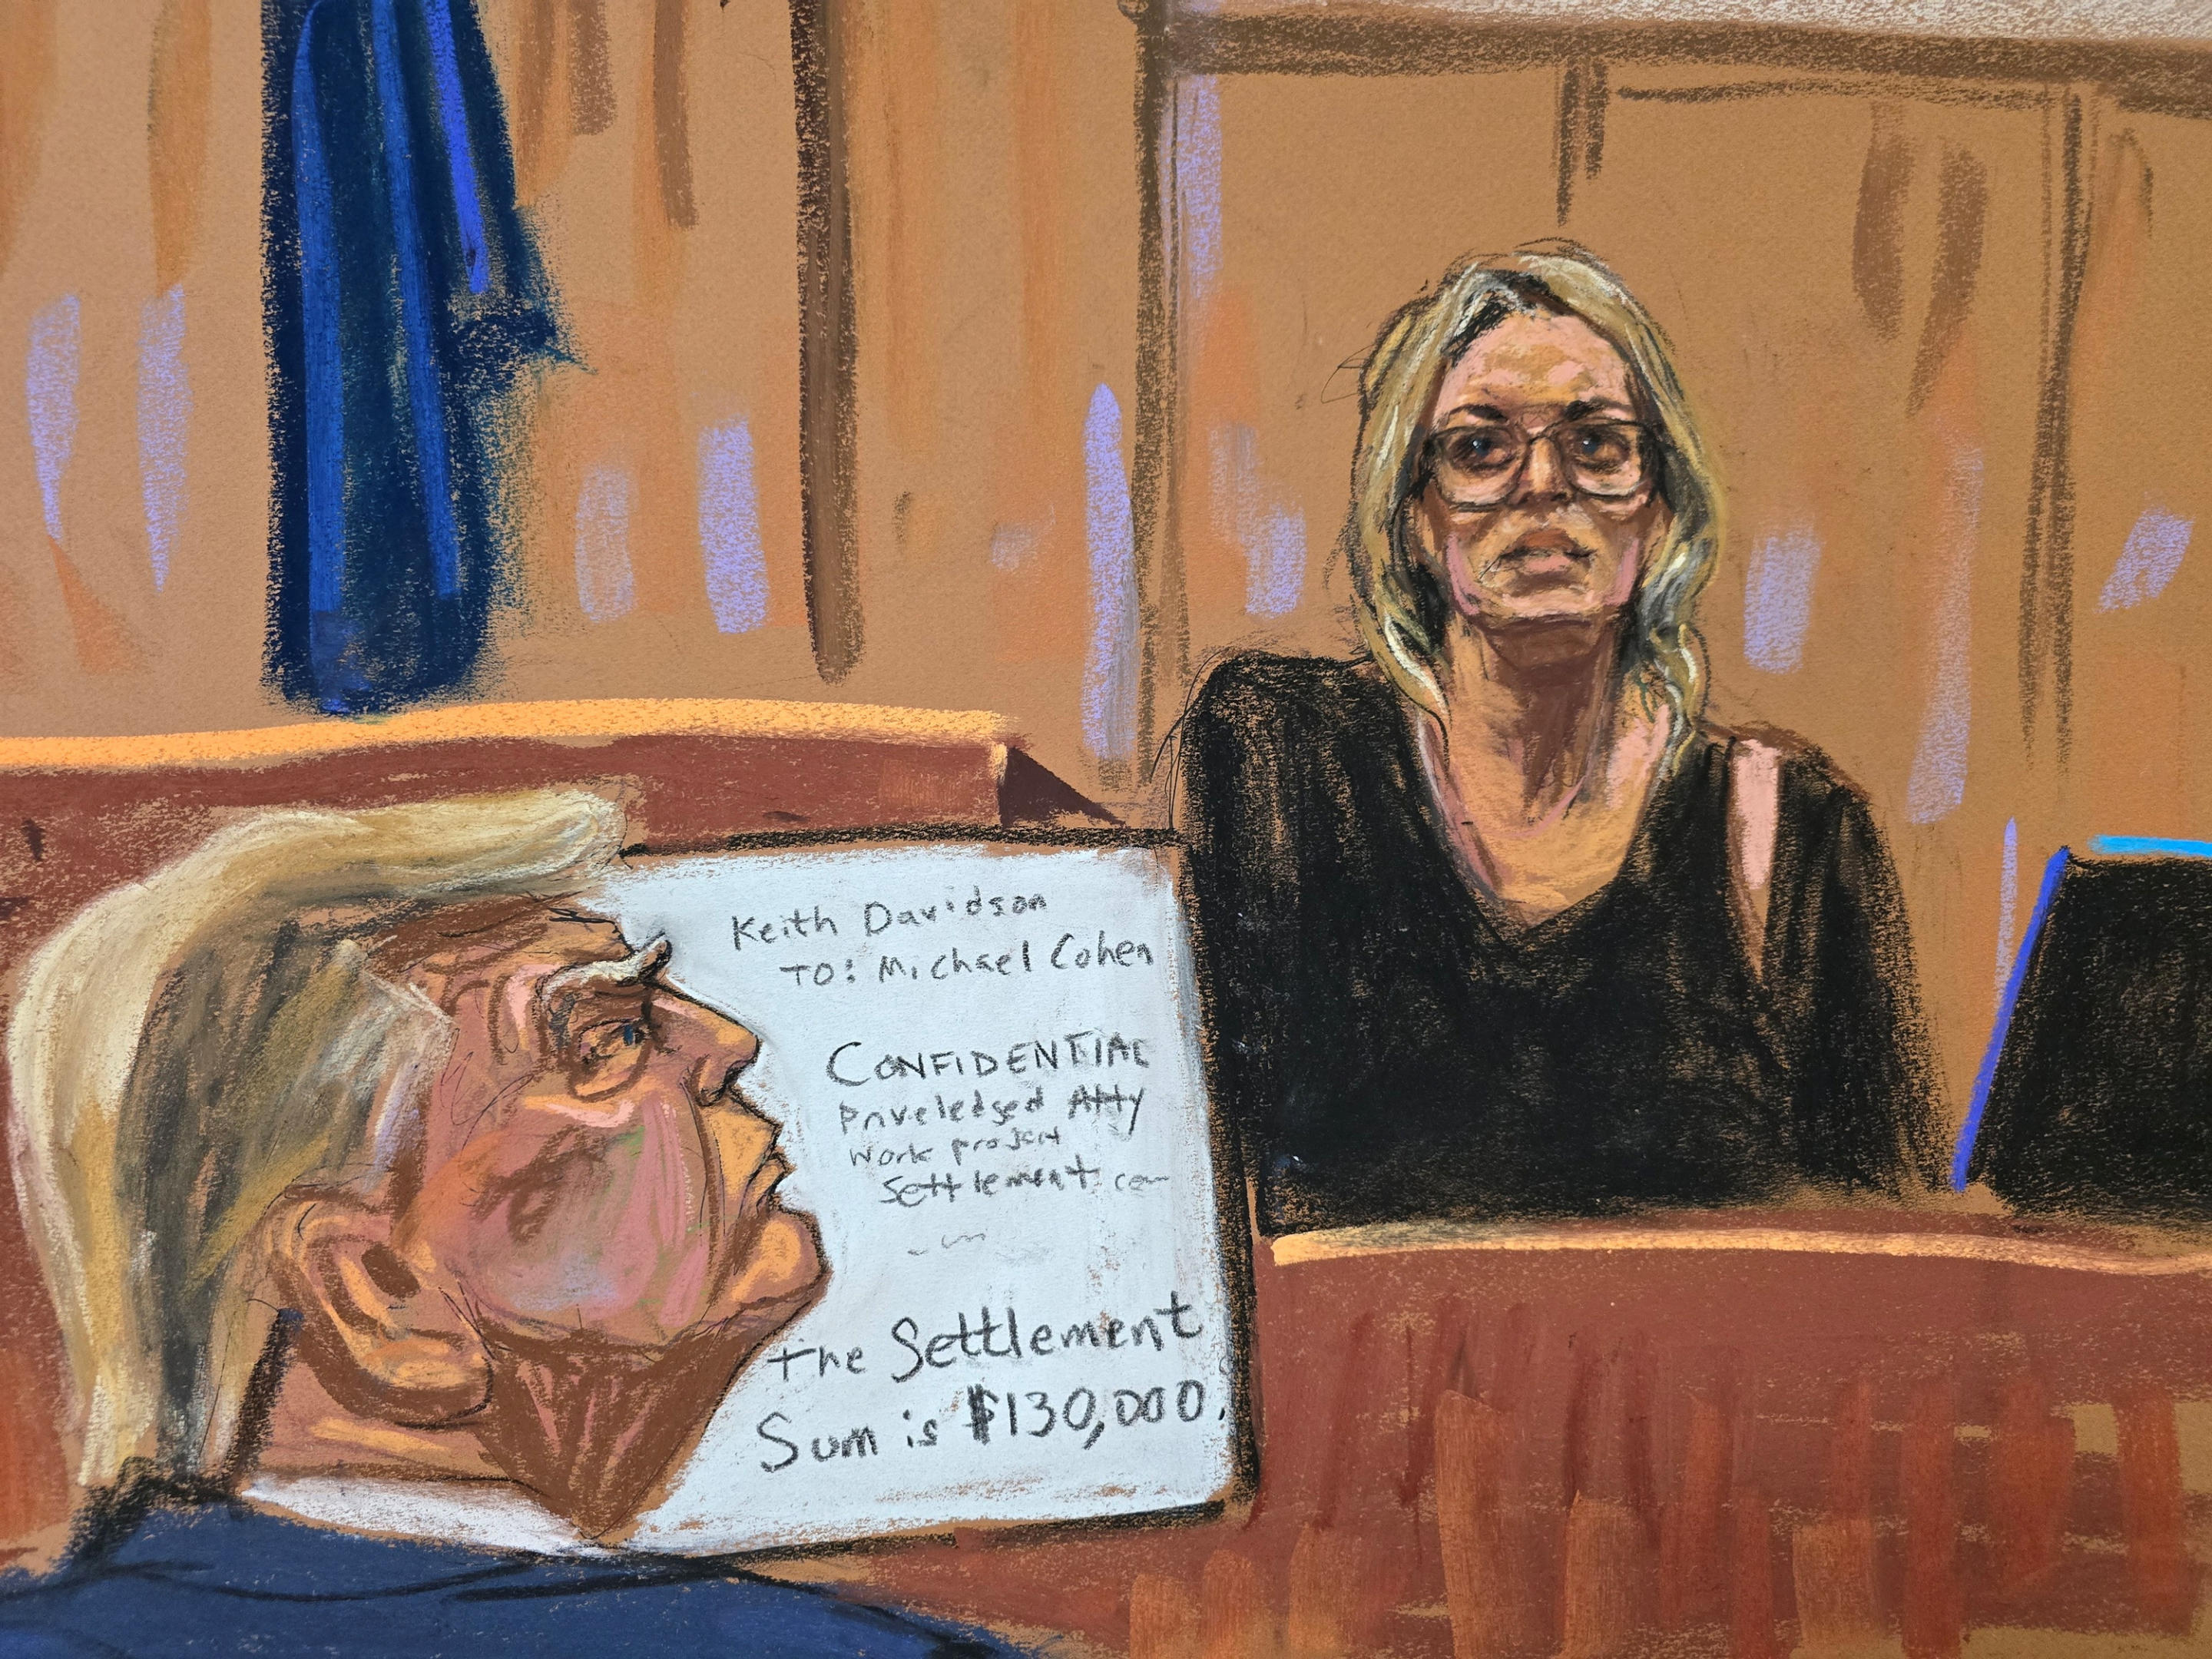 Former U.S. President Donald Trump watches as Stormy Daniels is questioned by prosecutor Susan Hoffinger during Trump's criminal trial on charges that he falsified business records to conceal money paid to silence porn star Stormy Daniels in 2016, in Manhattan state court in New York City, U.S. May 7, 2024 in this courtroom sketch. REUTERS/Jane Rosenberg